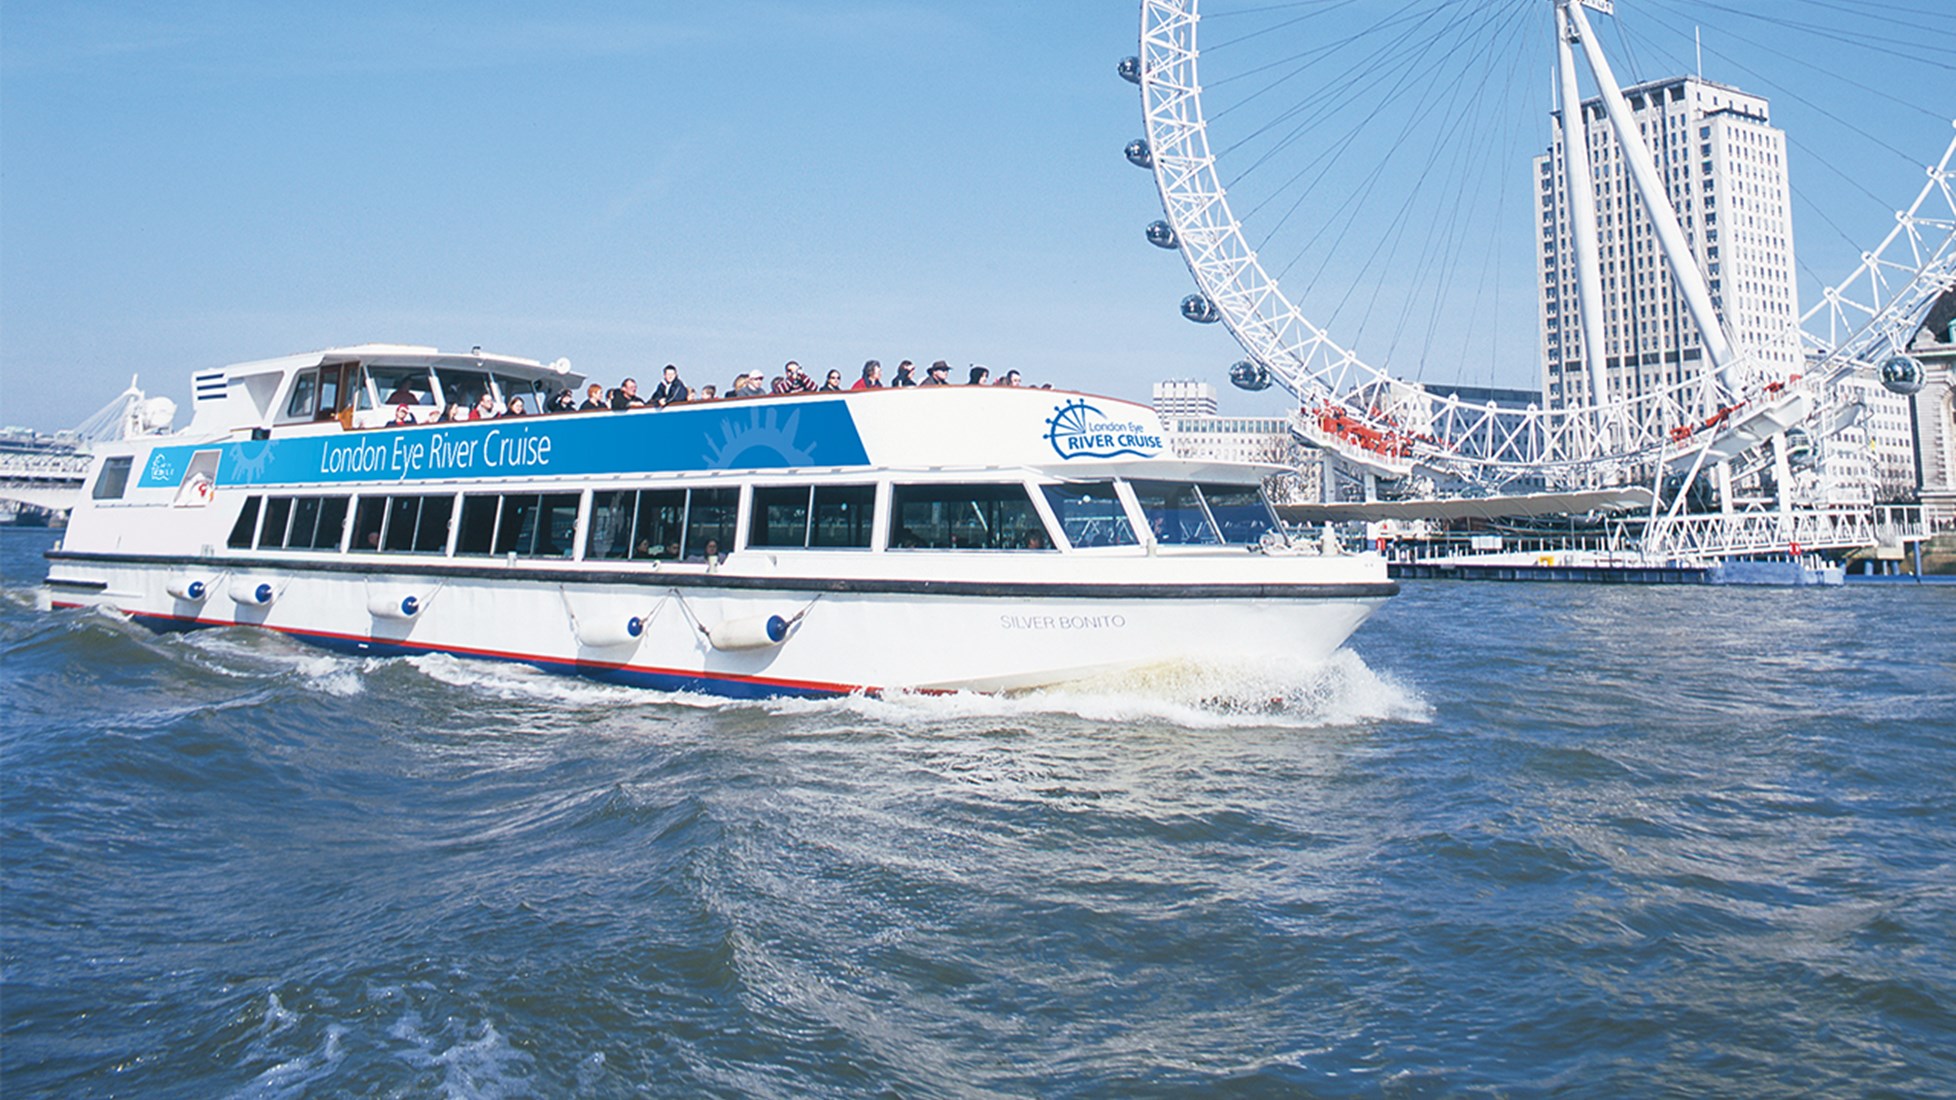 the thames boat trips